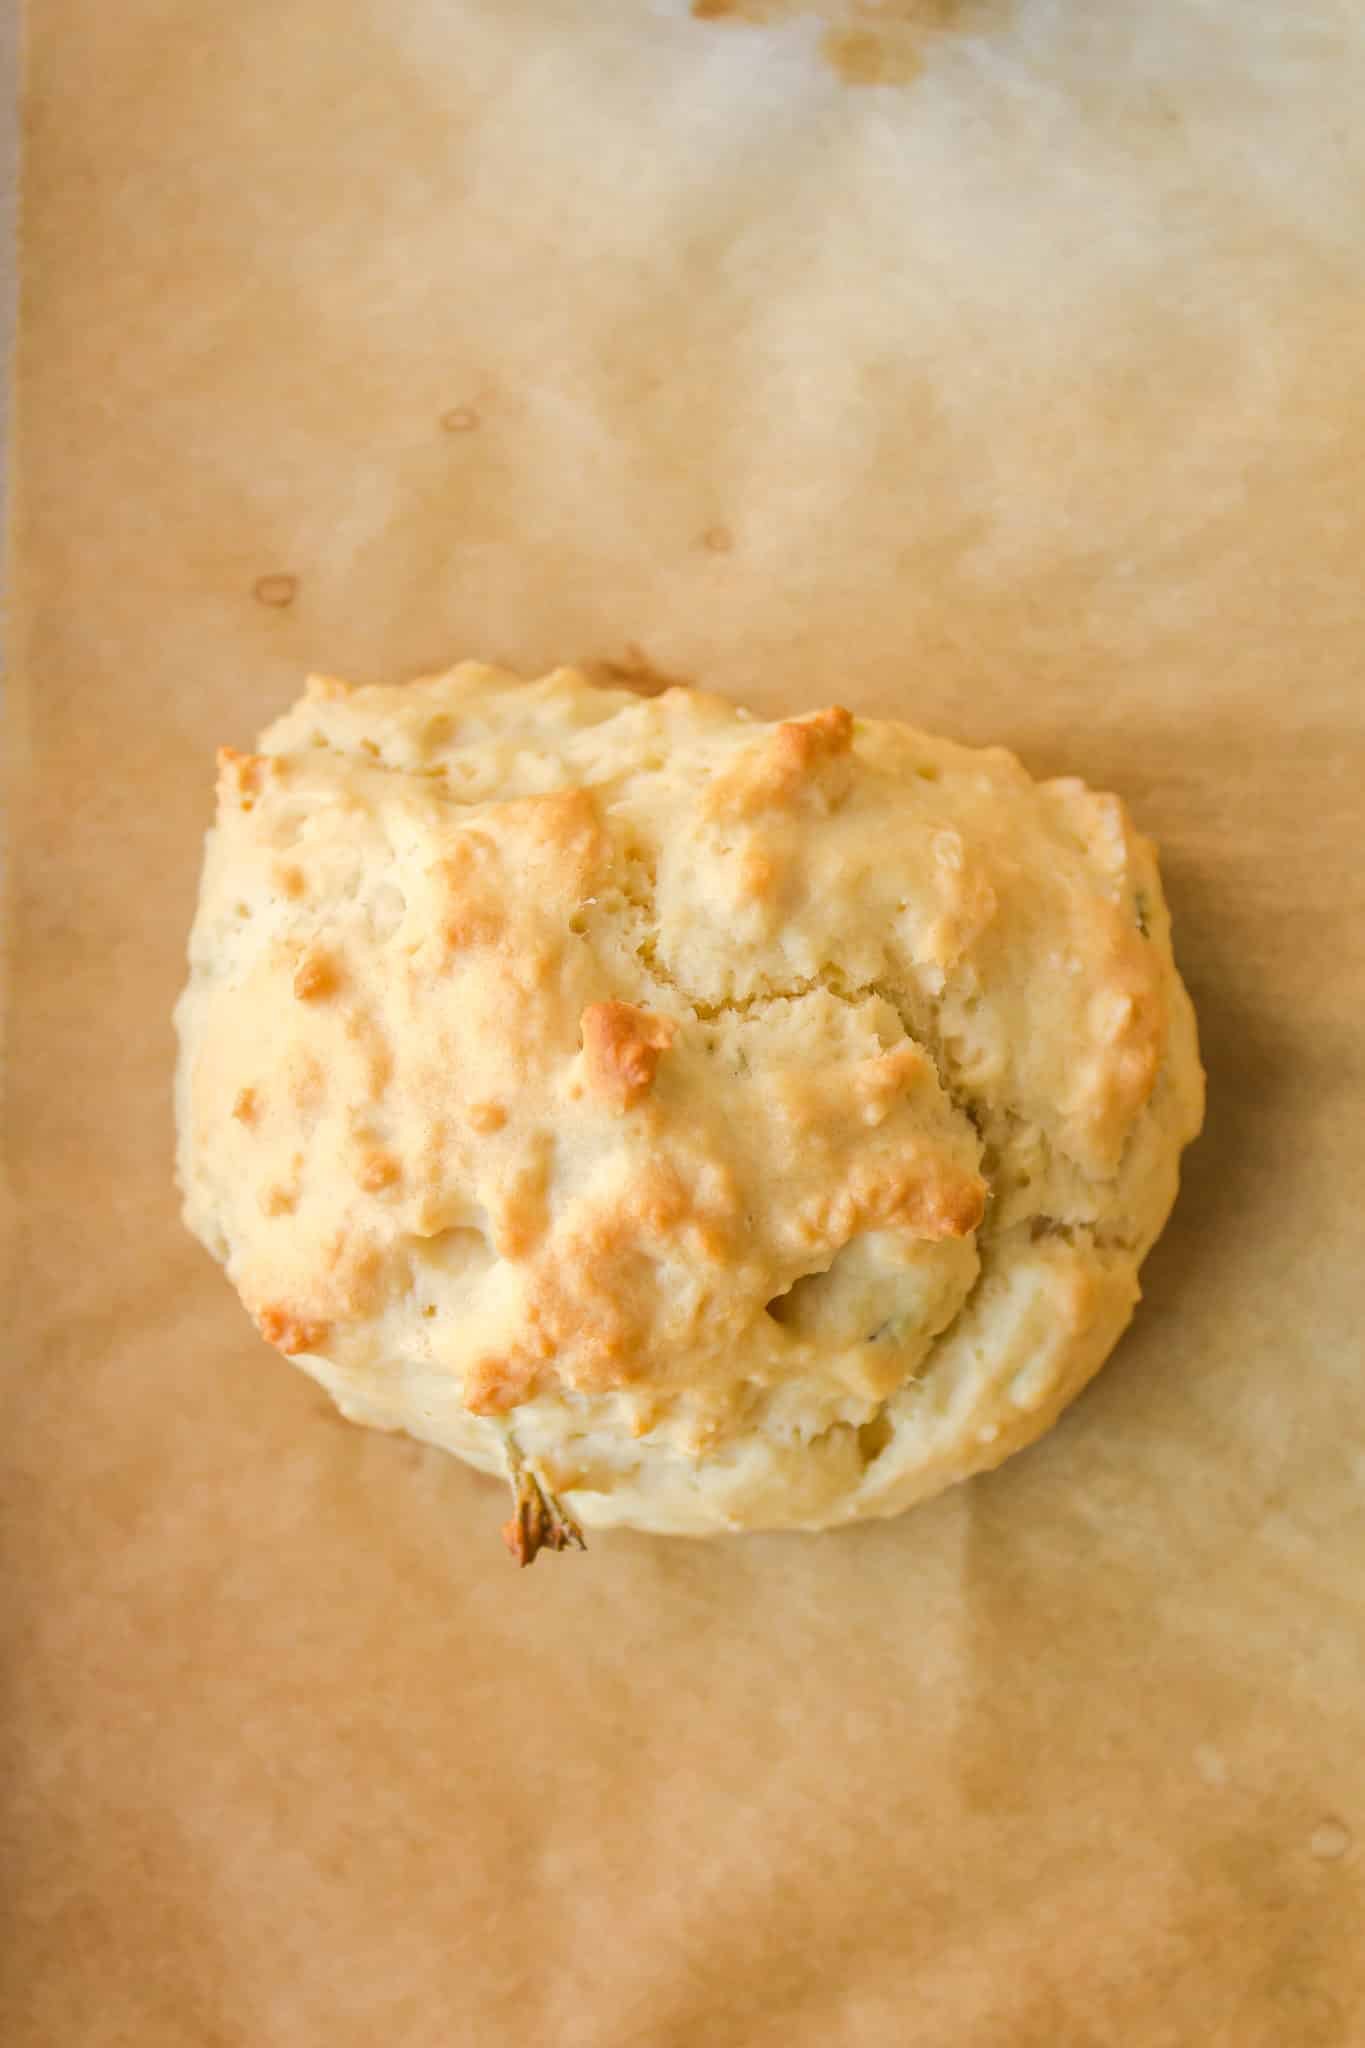 cooked gluten-free dairy-free biscuit on baking sheet.